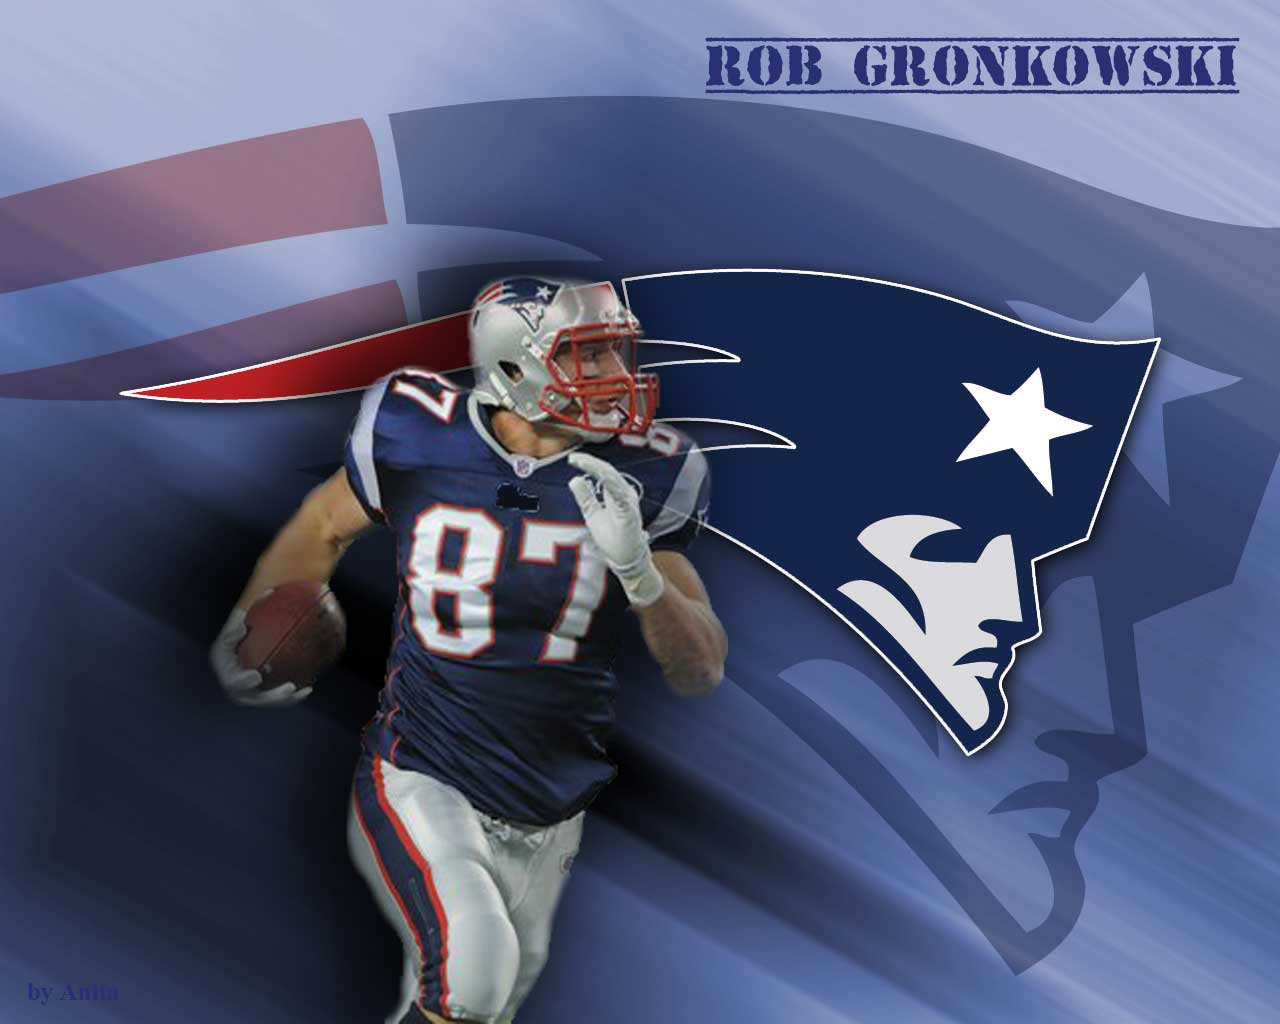 best image about Gronk. Patriots, Baby kiss